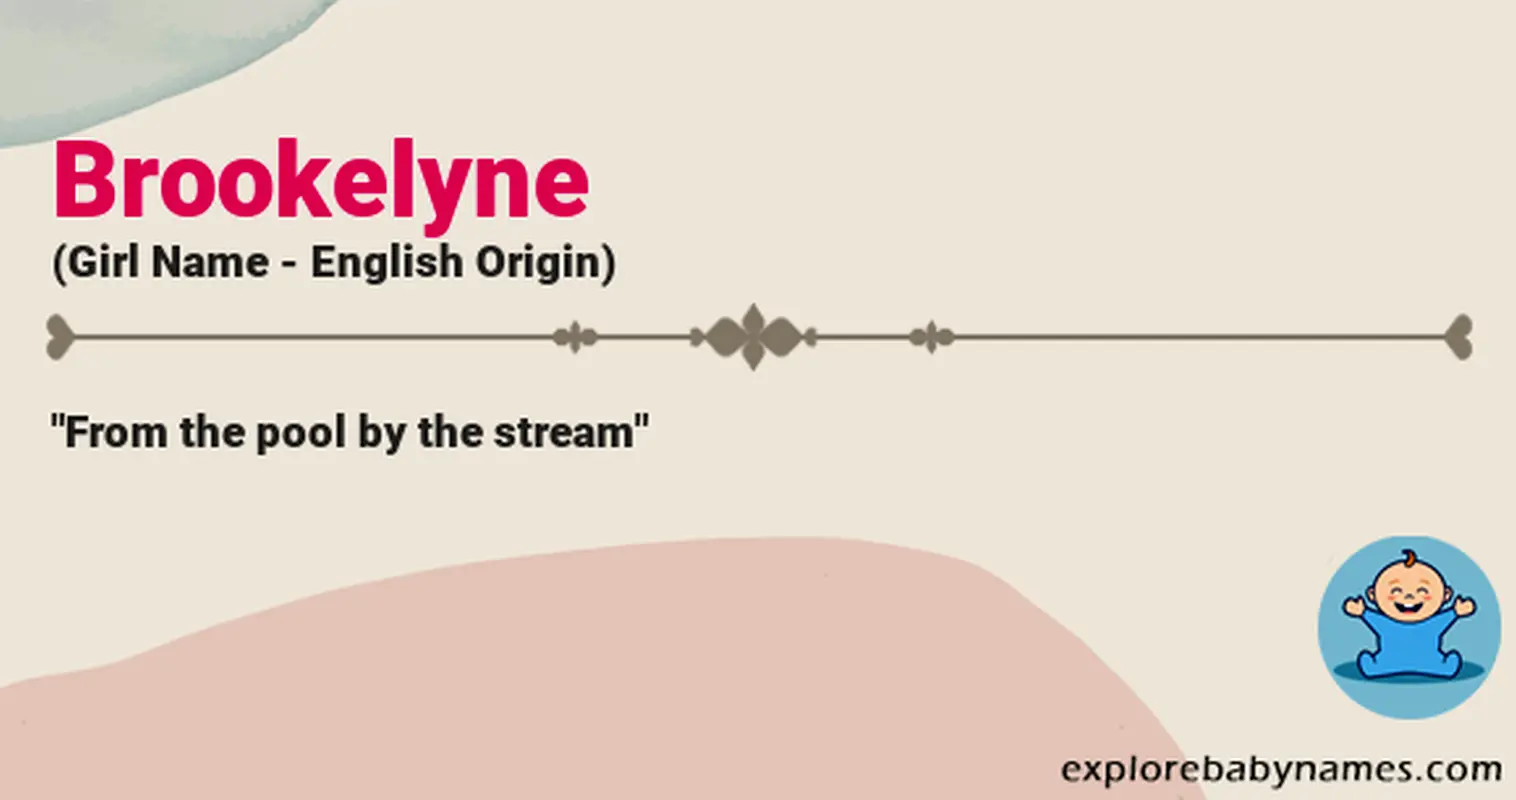 Meaning of Brookelyne